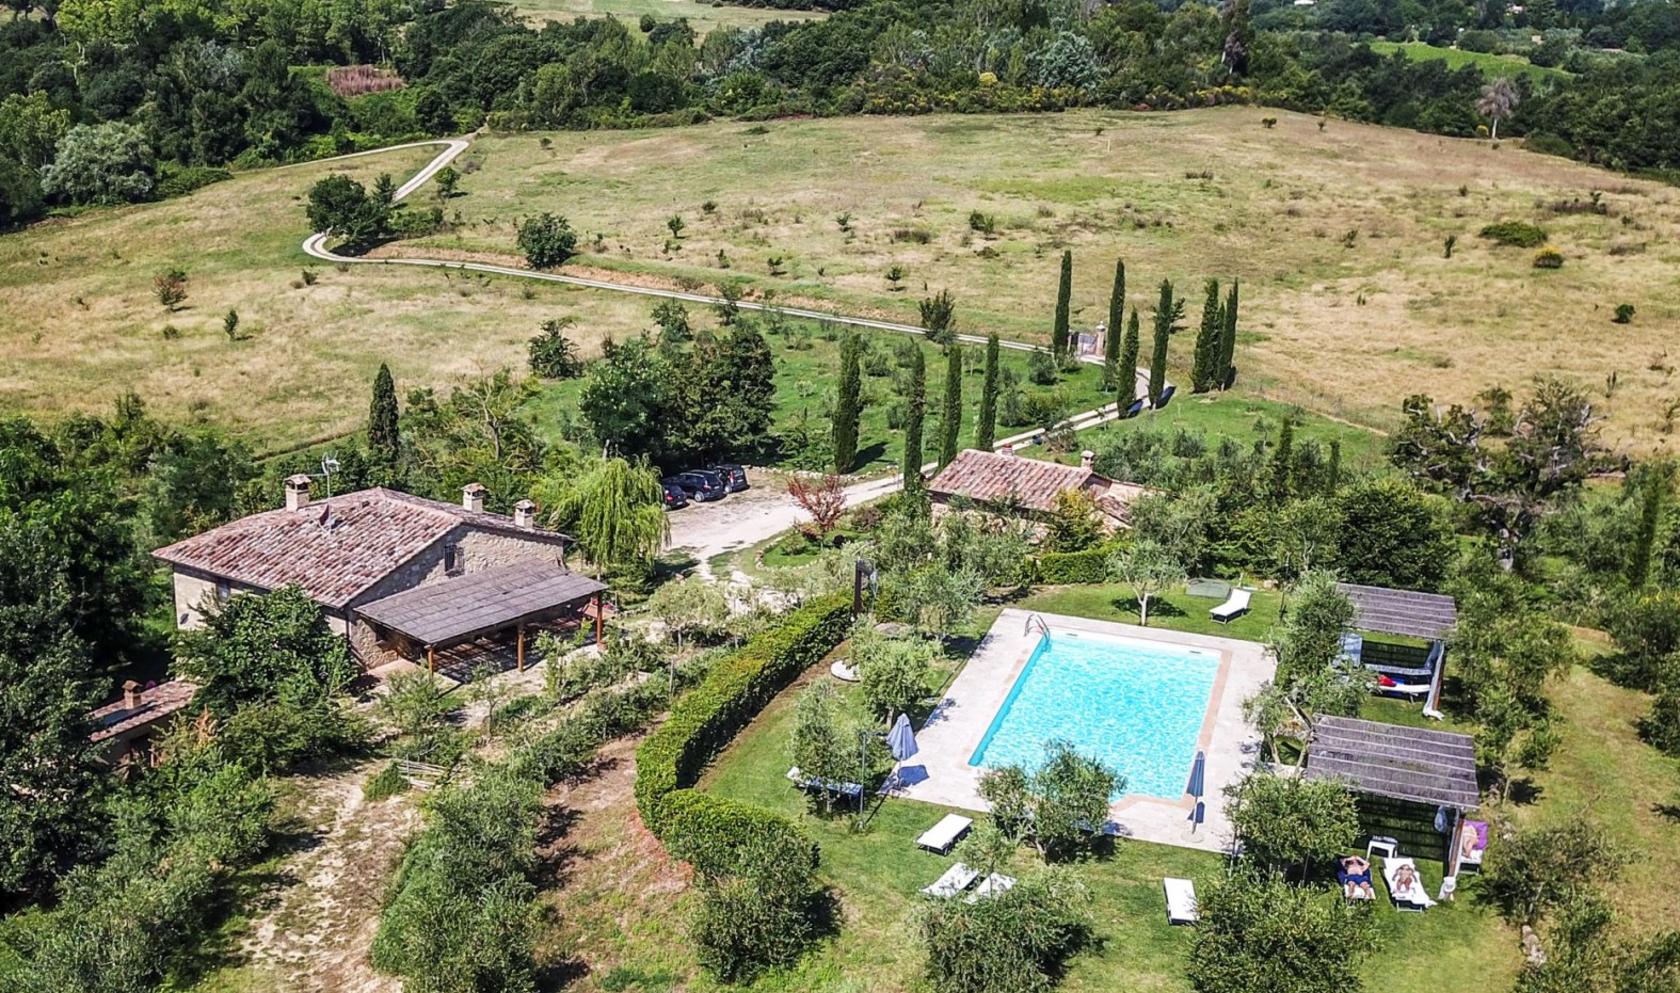 Toscana Immobiliare - real estate tuscany, siena real estate, houses for sale